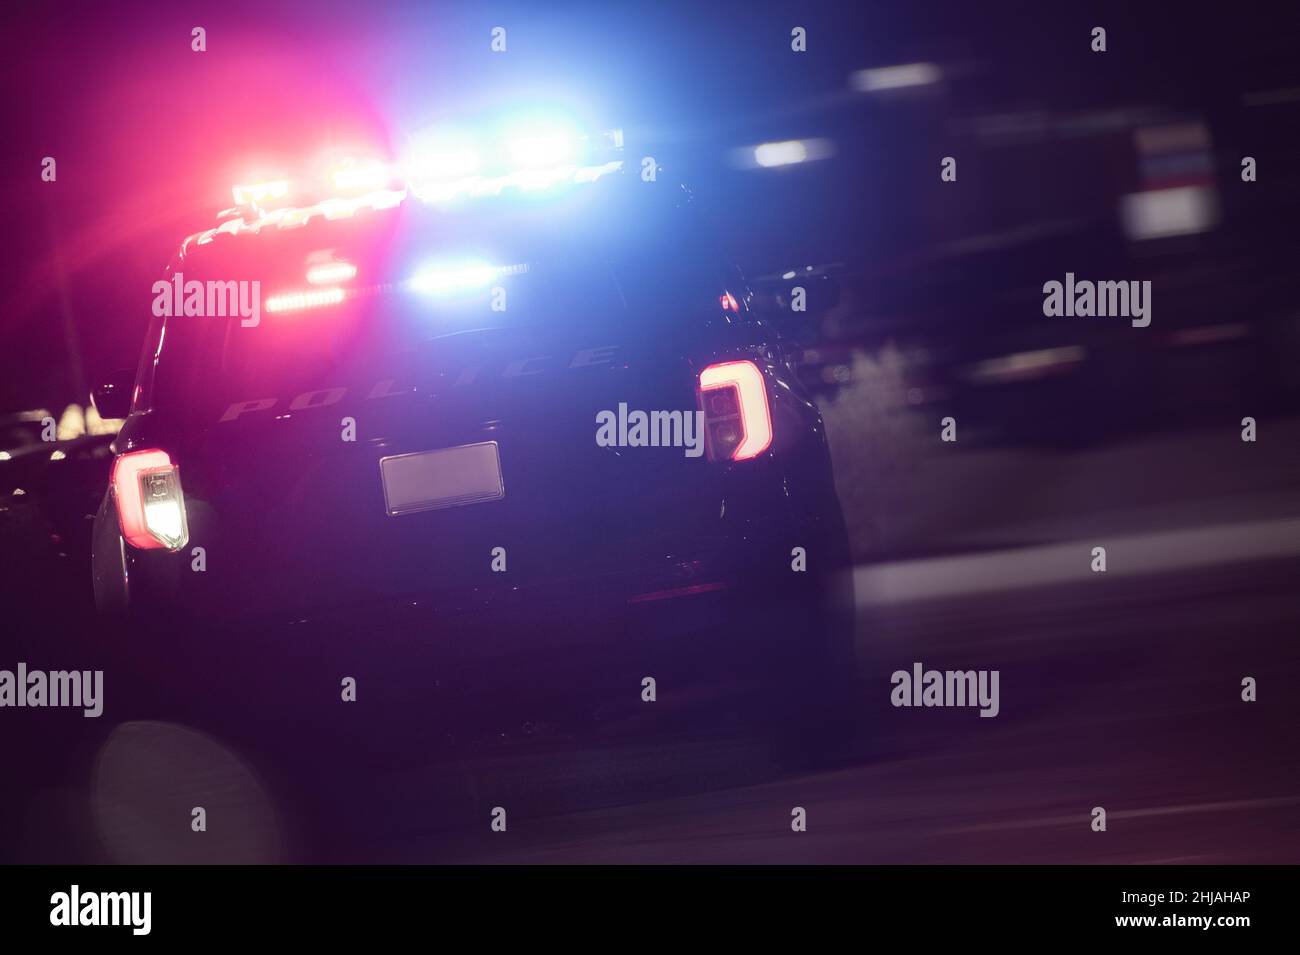 American Police SUV Cruiser with Flashing Lights in Night Time Action. Law Enforcement Theme. Stock Photo